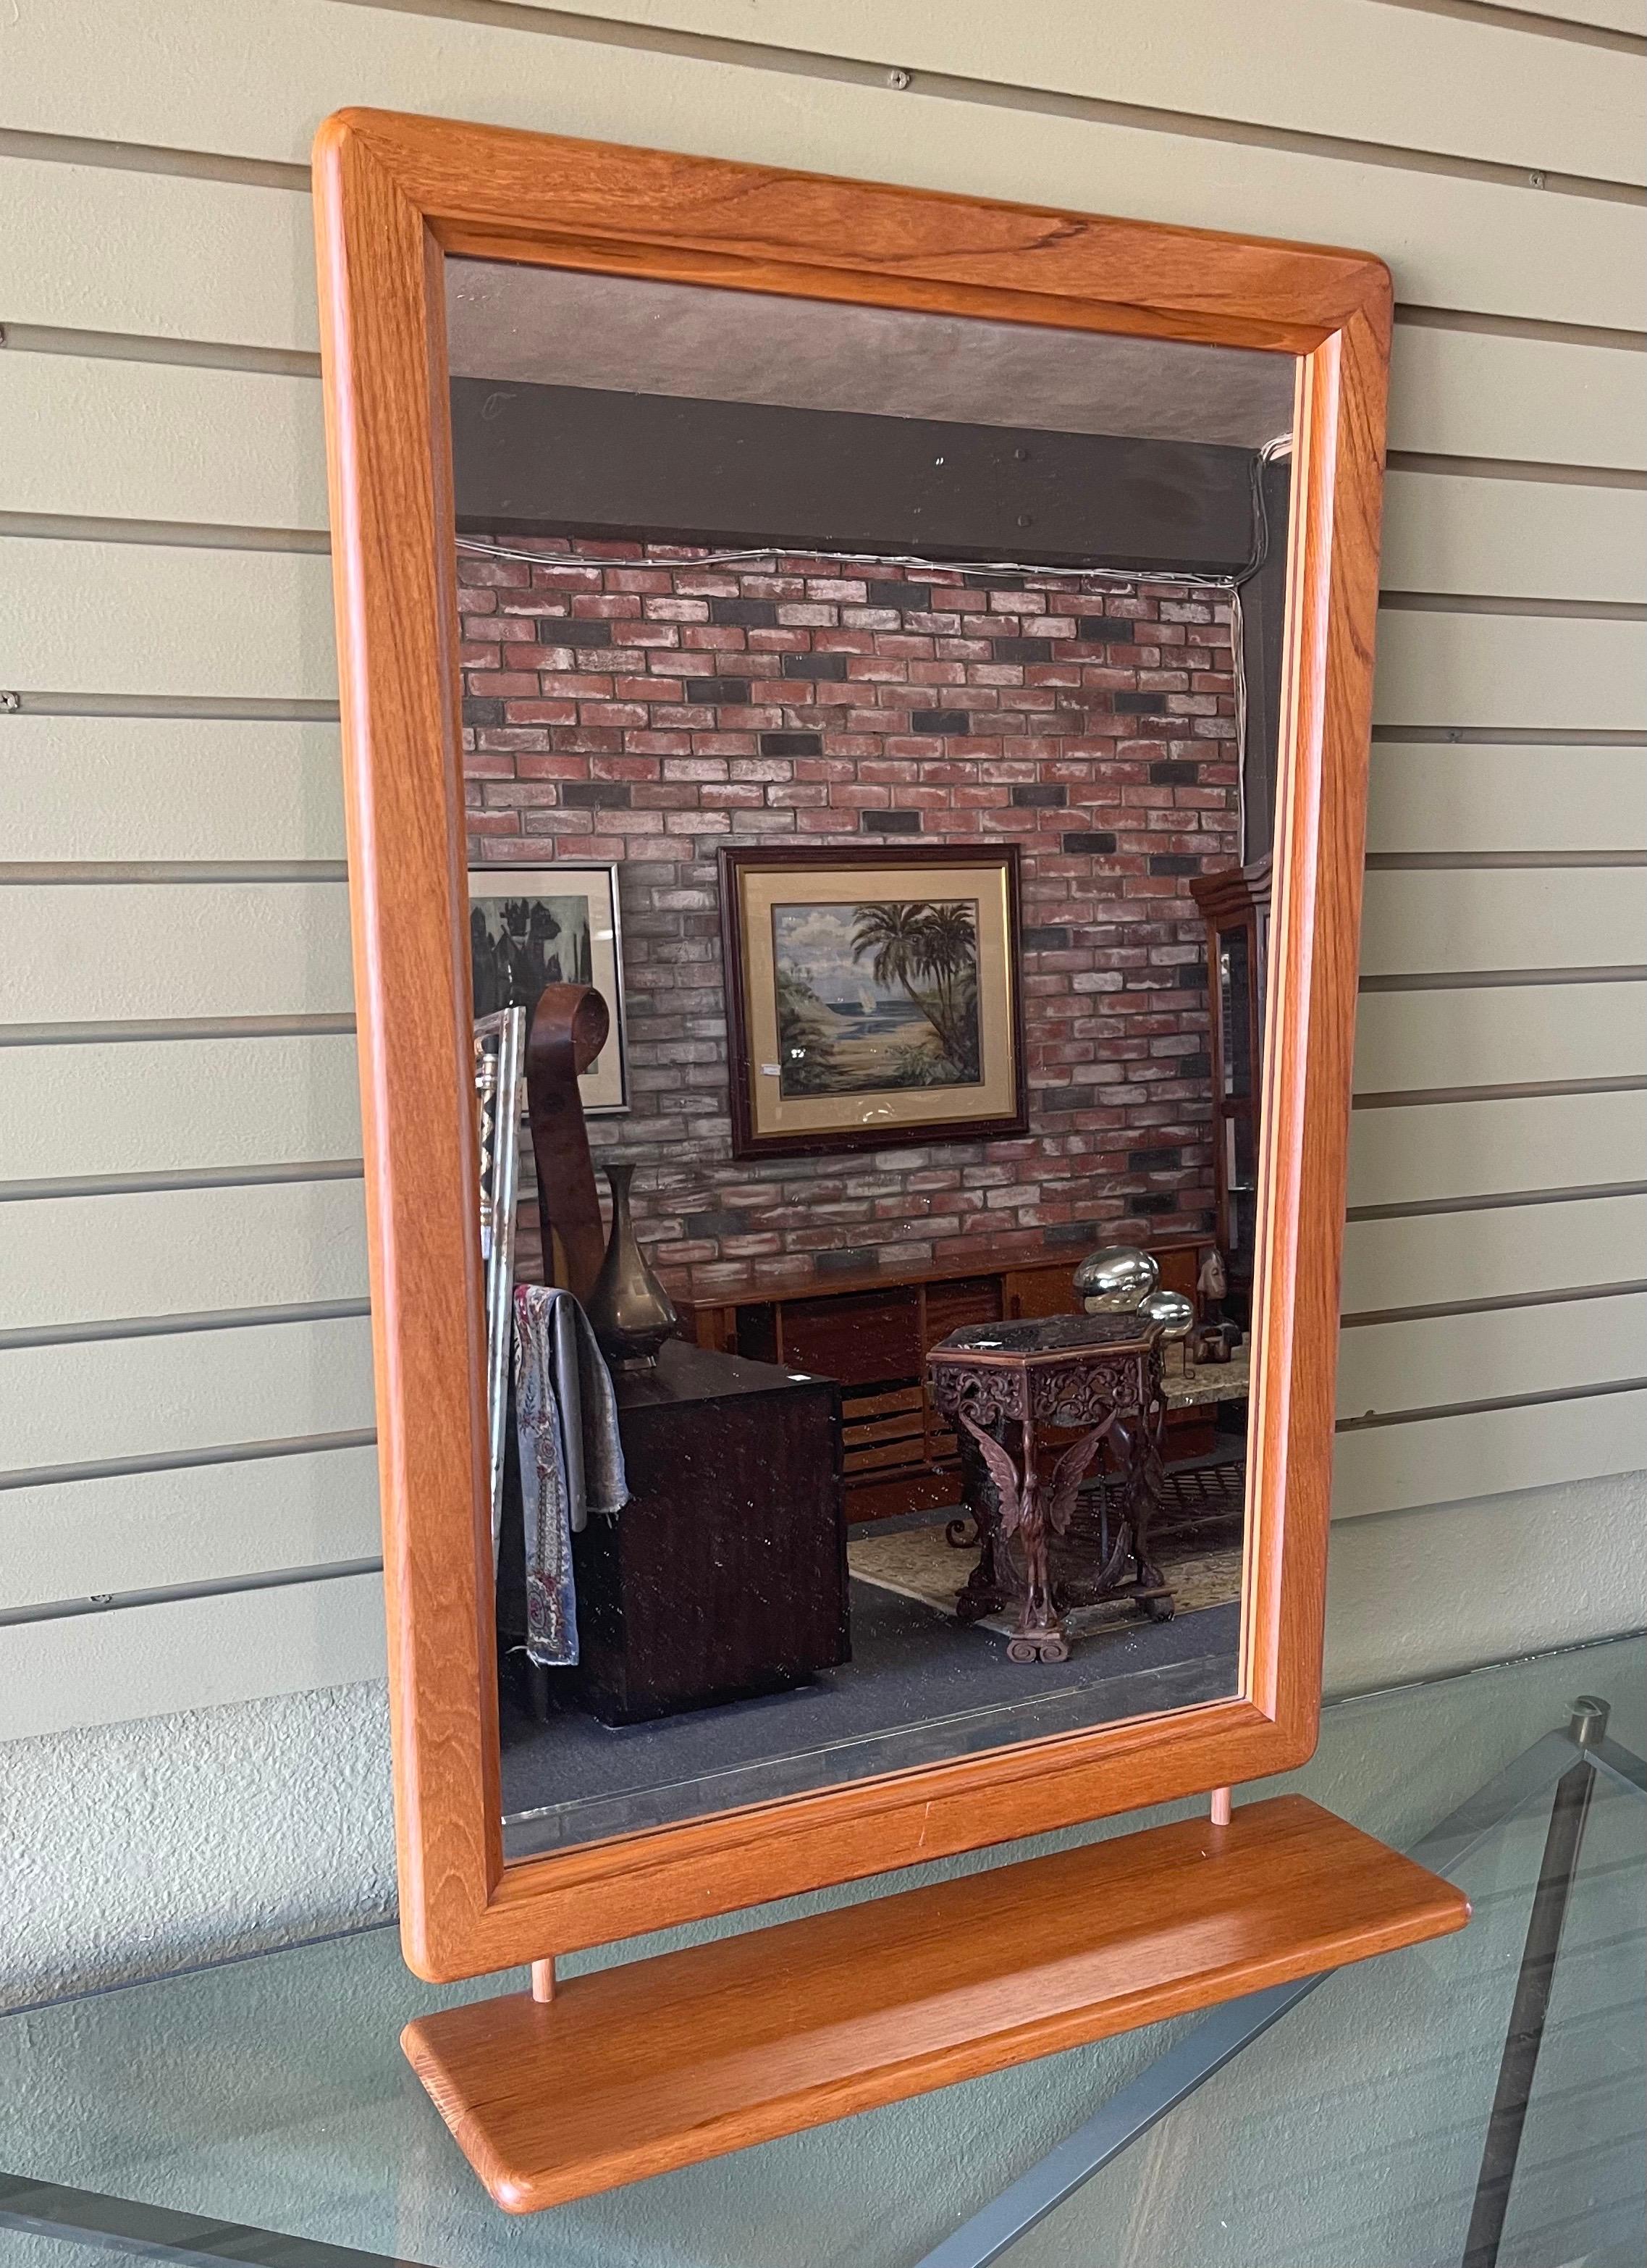 Elegant Danish modern solid teak mirror with rounded corners and shelf, circa 1970s. The large mirror is in great condition with a 2